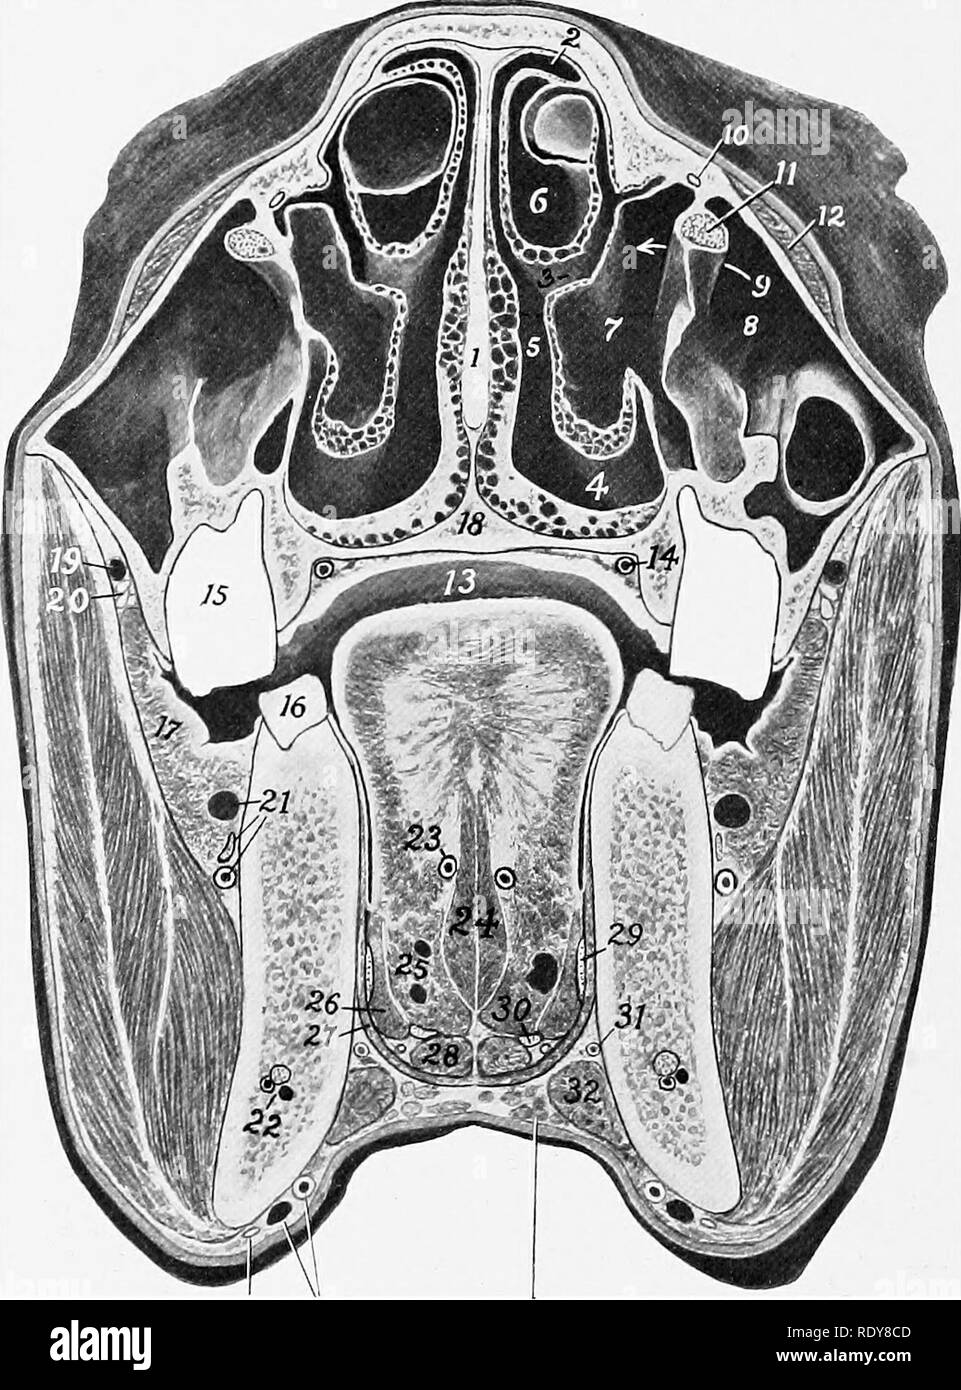 . The anatomy of the domestic animals . Veterinary anatomy. 512 RESPIRATORY SYSTEM OF THE HORSE mass IS composed, there are three principal and numerous small passages, the ethmoidal meatuses (Meatus ethmoidales). The choanae or posterior nares are two elliptical orifices by which the nasal cavity and pharynx commmricate. They are in the same plane as the floor of the. Parotid ExUrnal Mandibular duct maxillary lymph glands vessels Fig. 455.—Cross-section of He.^d of Horse. The section is cut midway between the medial canthus and the anterior end of the facial crest and is a front view. 1, Sept Stock Photo